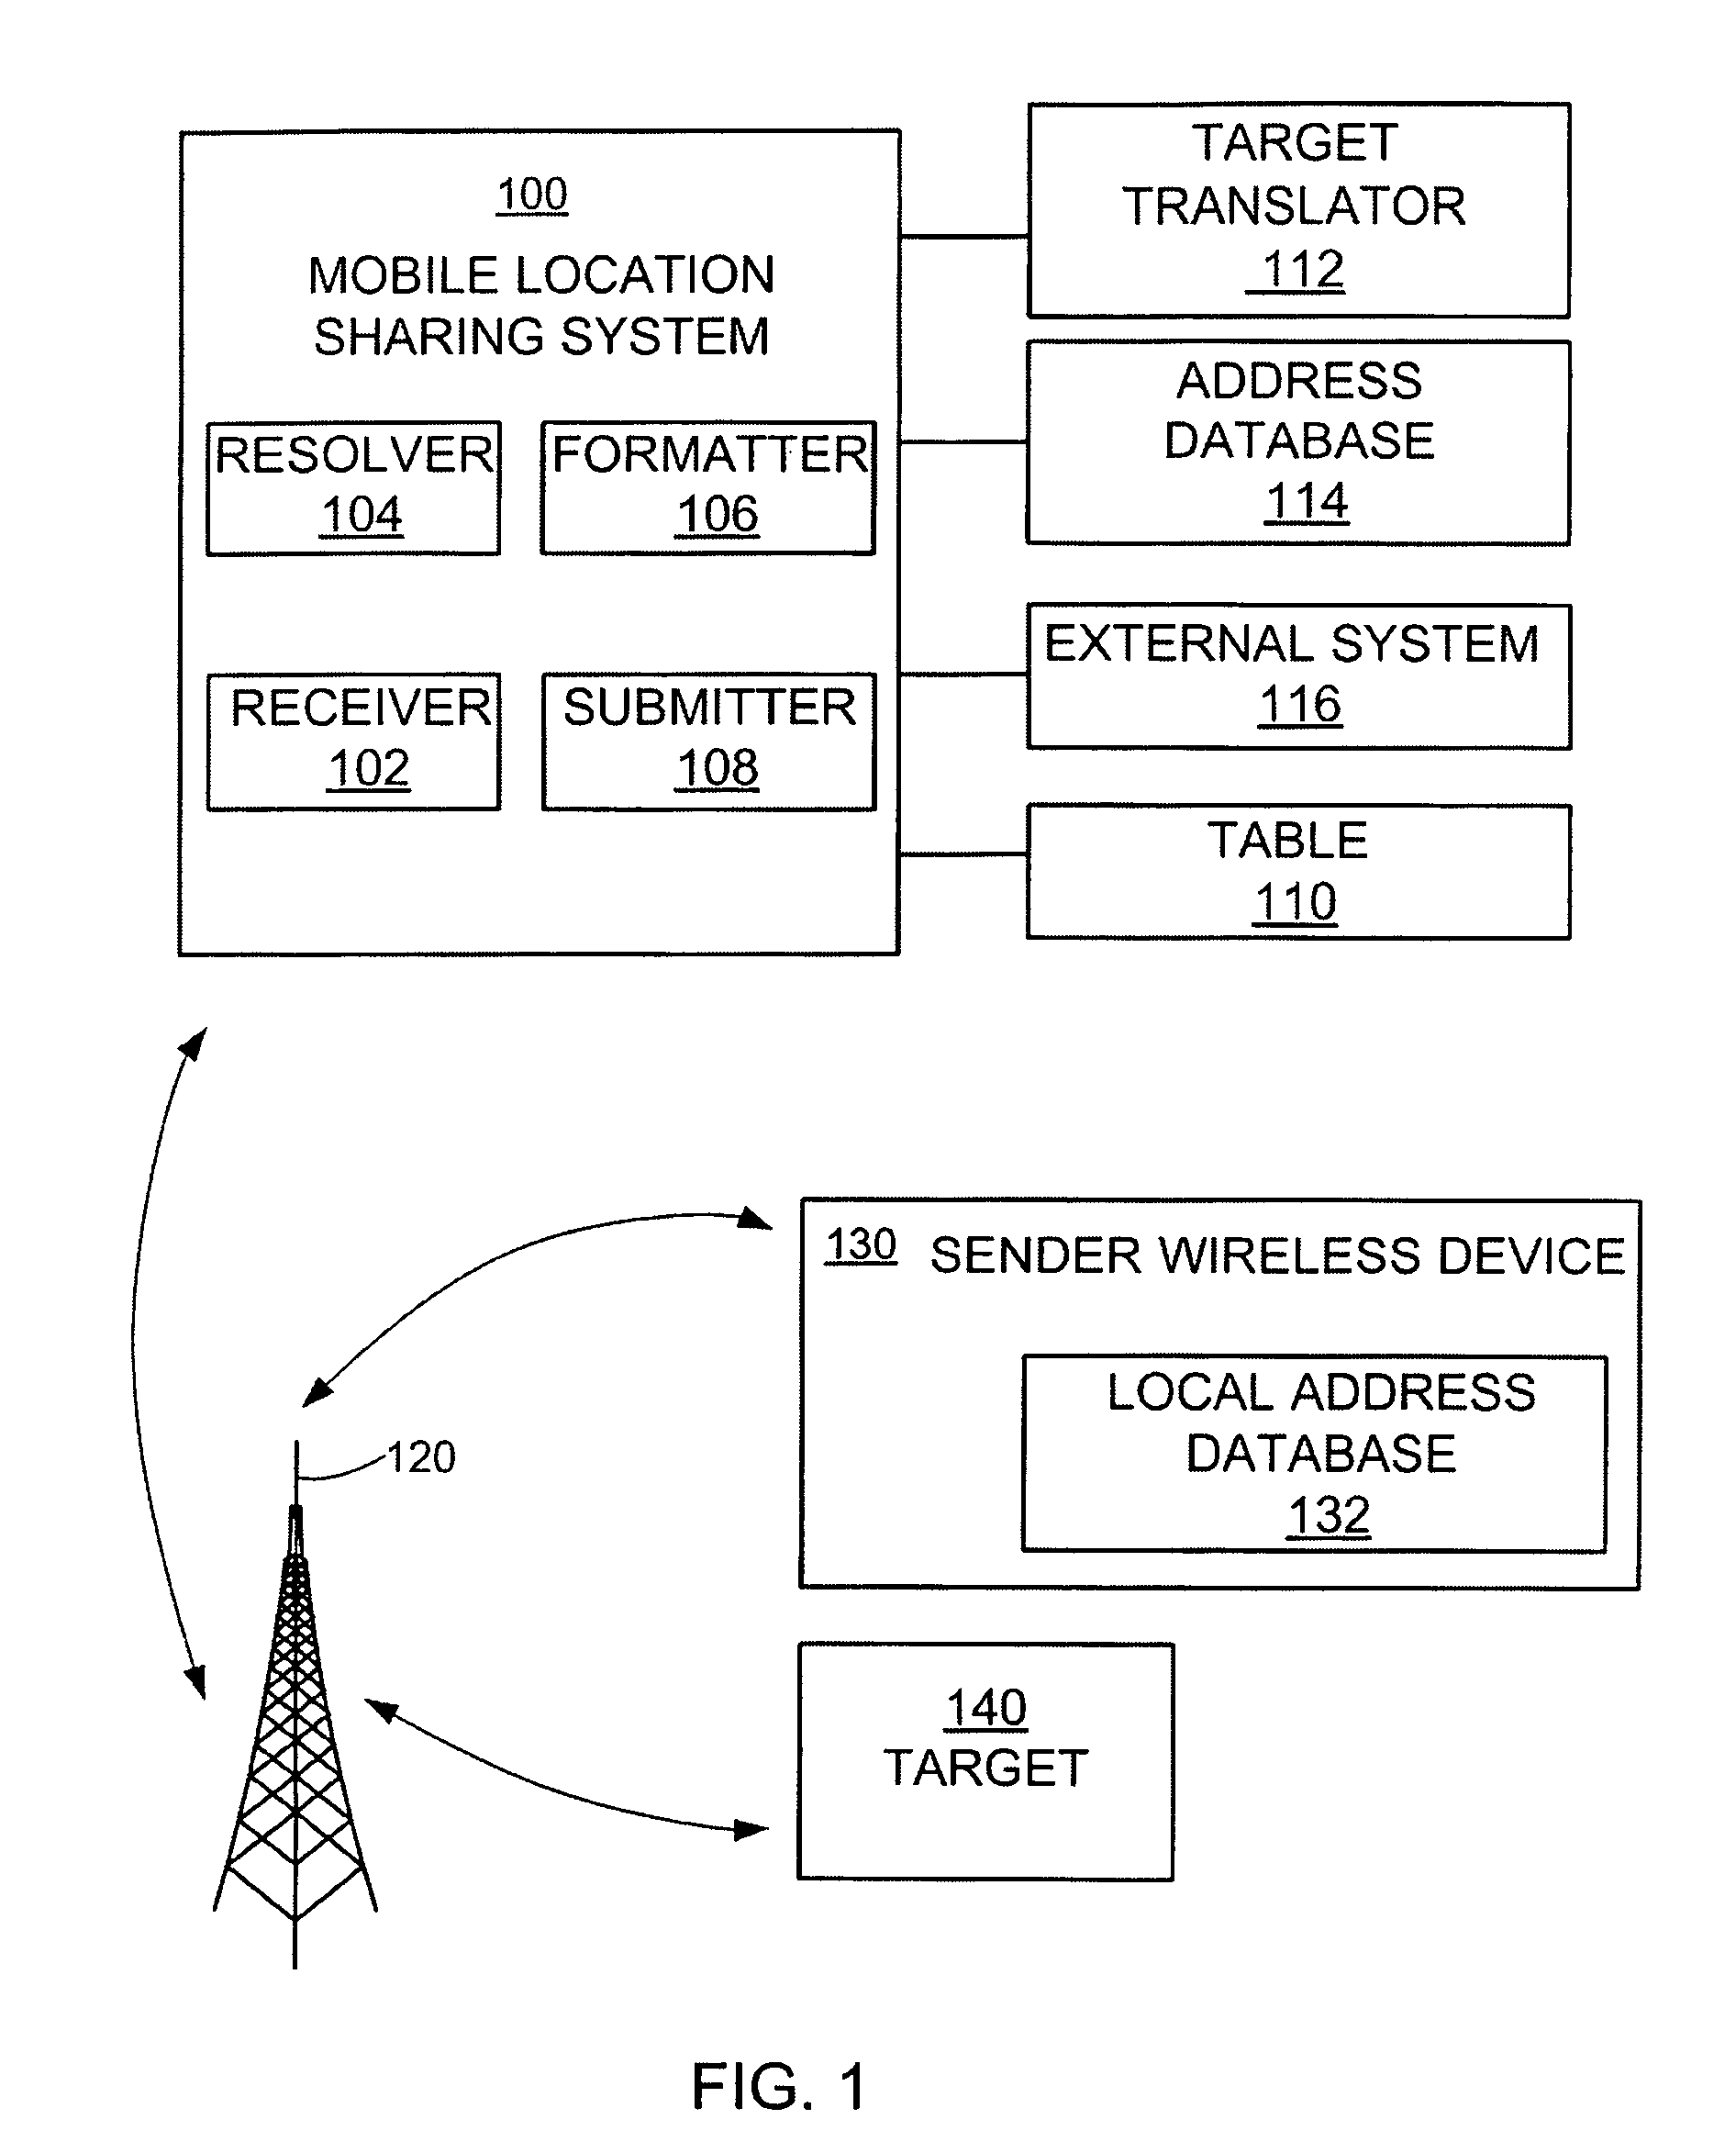 Mobile location sharing system